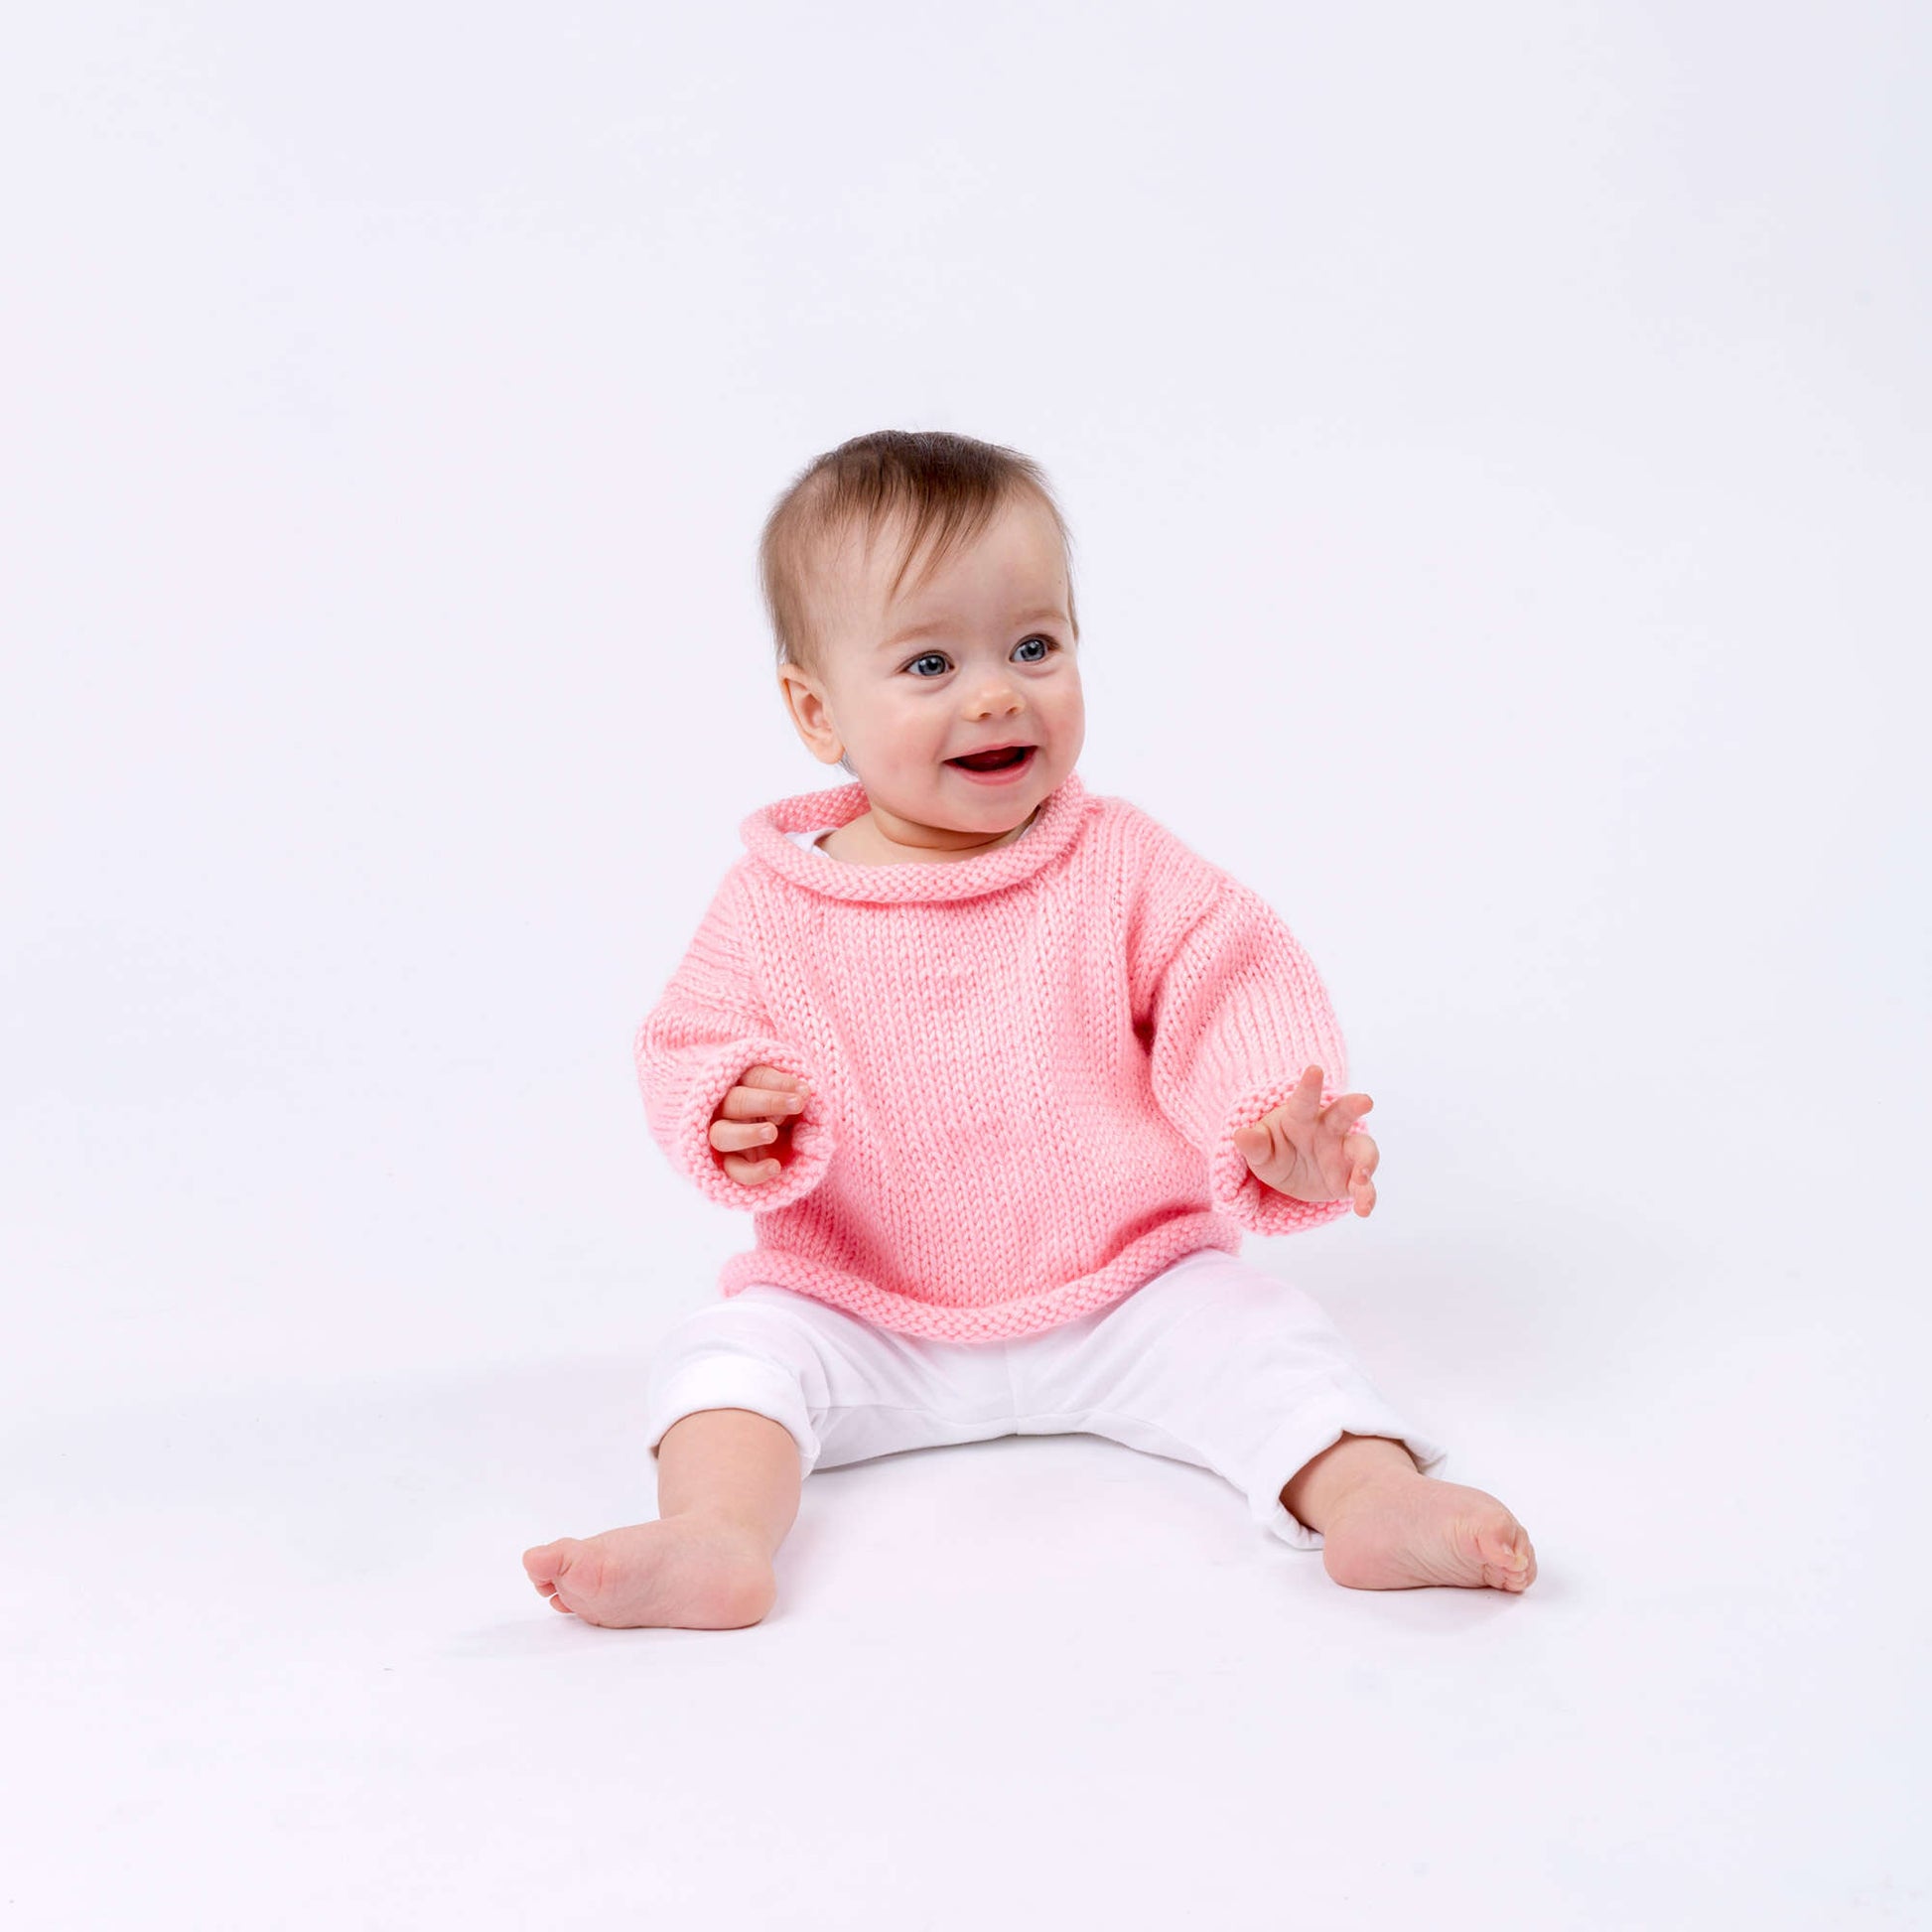 Free Red Heart Pretty-n-Pink Baby Pullover Knit Pattern